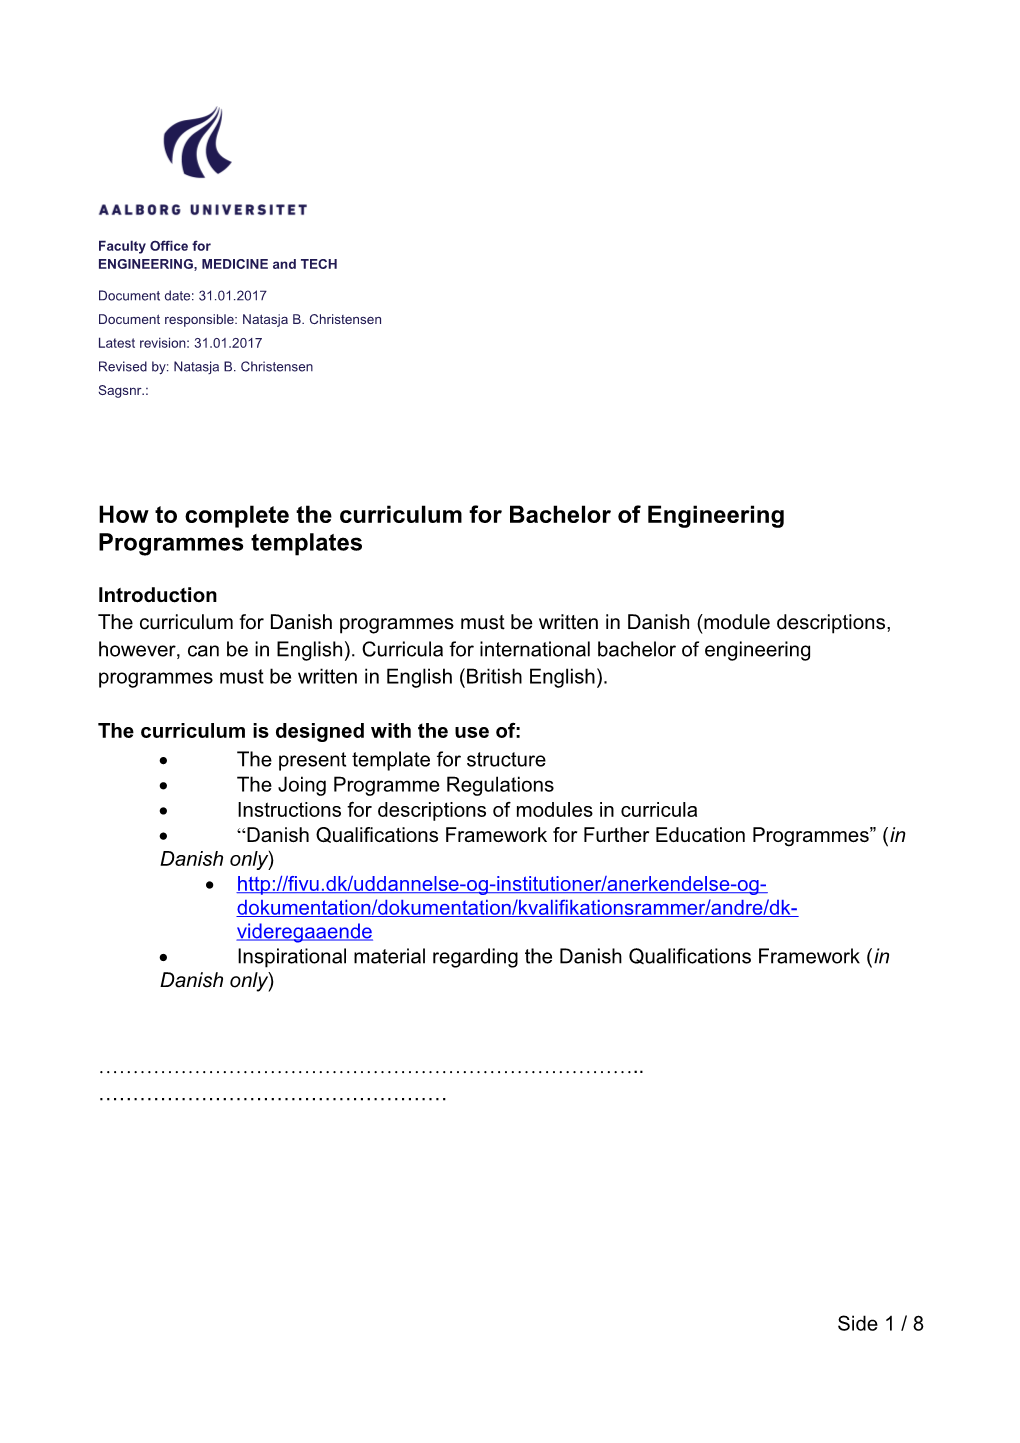 How to Complete the Curriculum for Bachelor of Engineering Programmes Templates